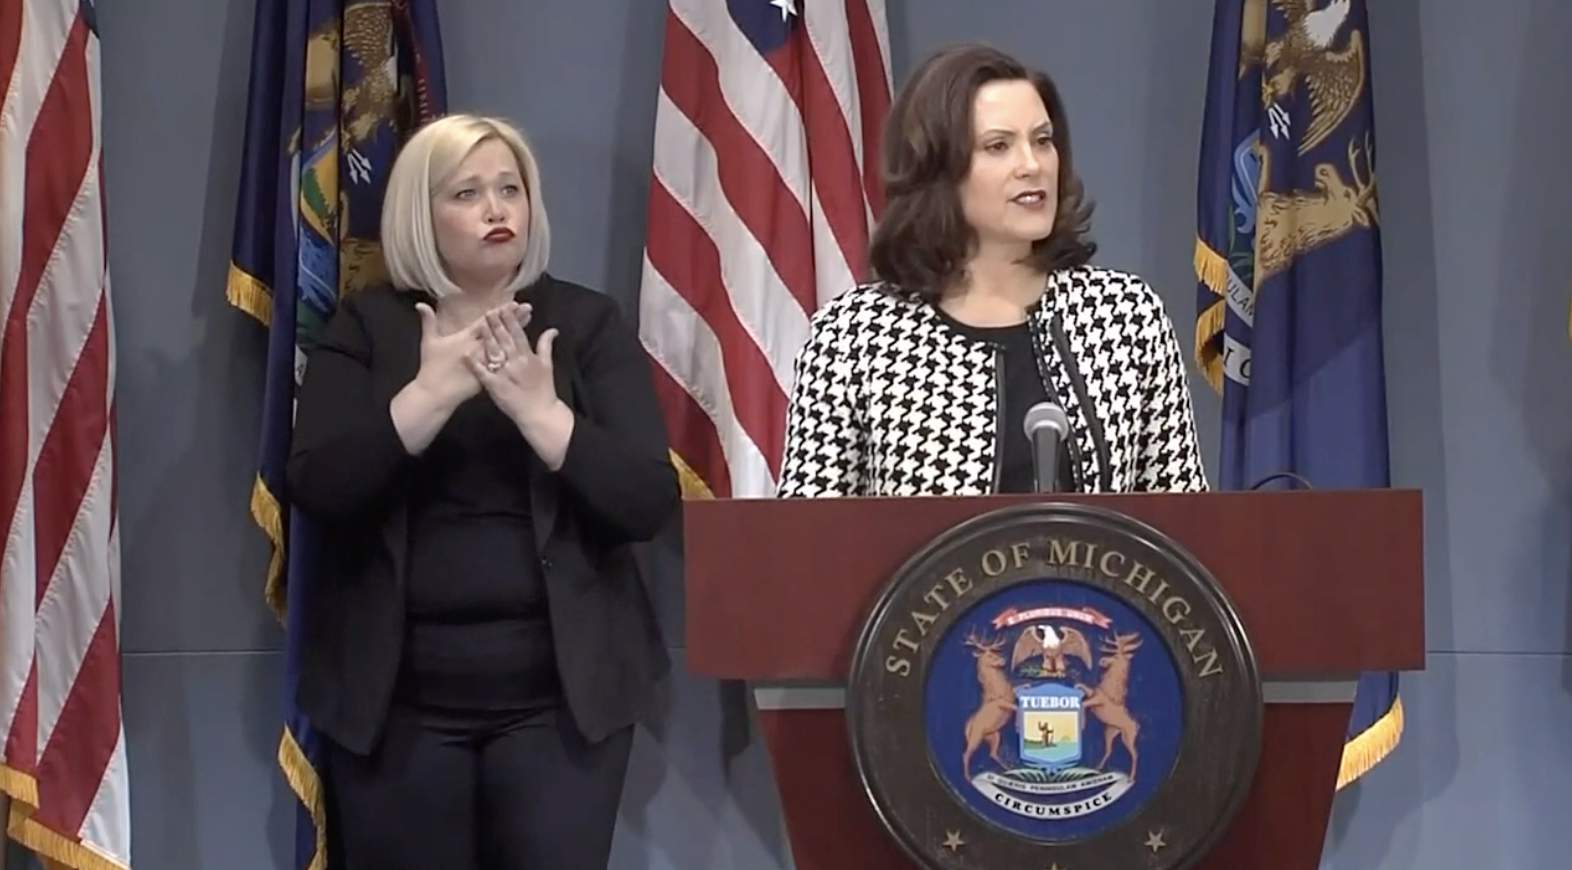 Gov. Whitmer points to hopeful signs in Michigan’s COVID-19 fight, says next 10 days are key